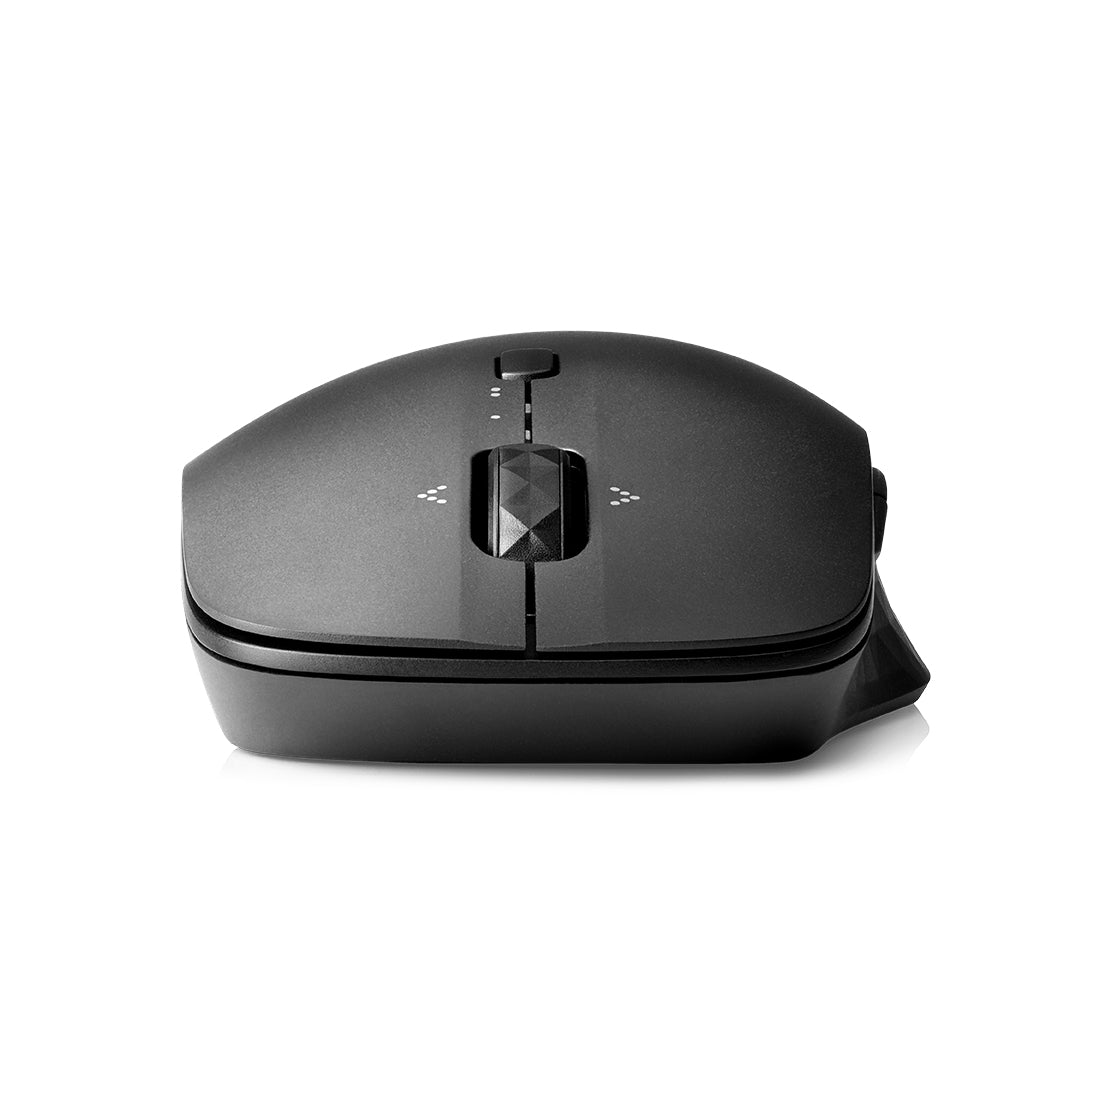 [RePacked] HP Bluetooth Travel Mouse with 5-buttons and Trackon-glass Sensor